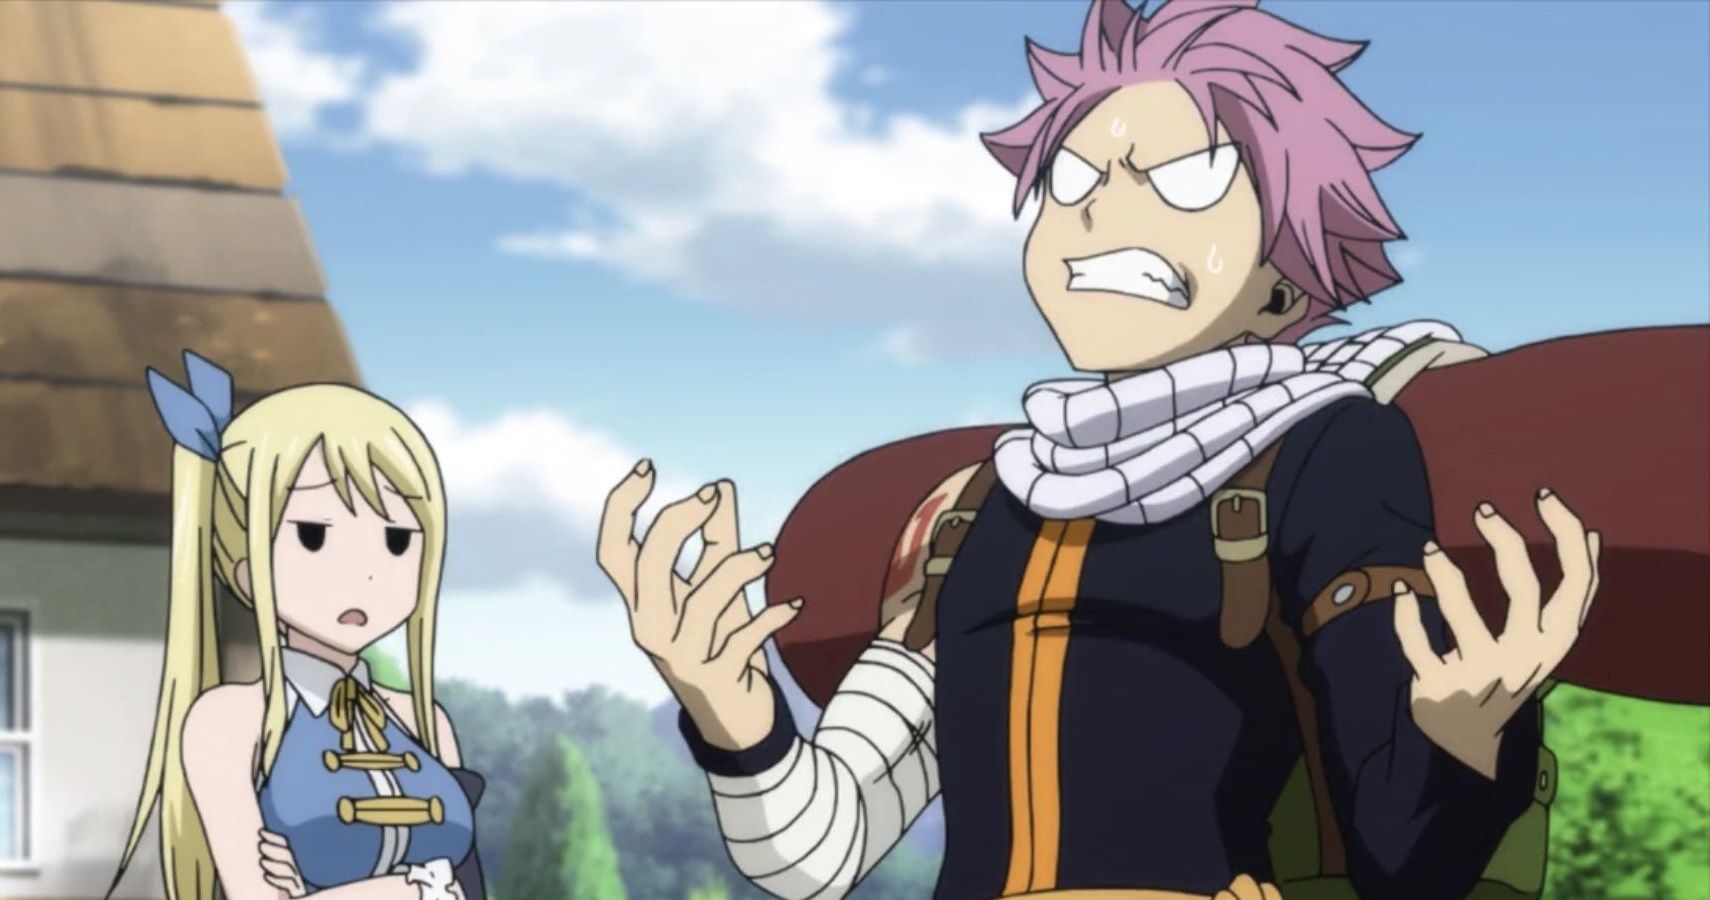 Fairy Tail – Natsu Dragneel / Characters - TV Tropes